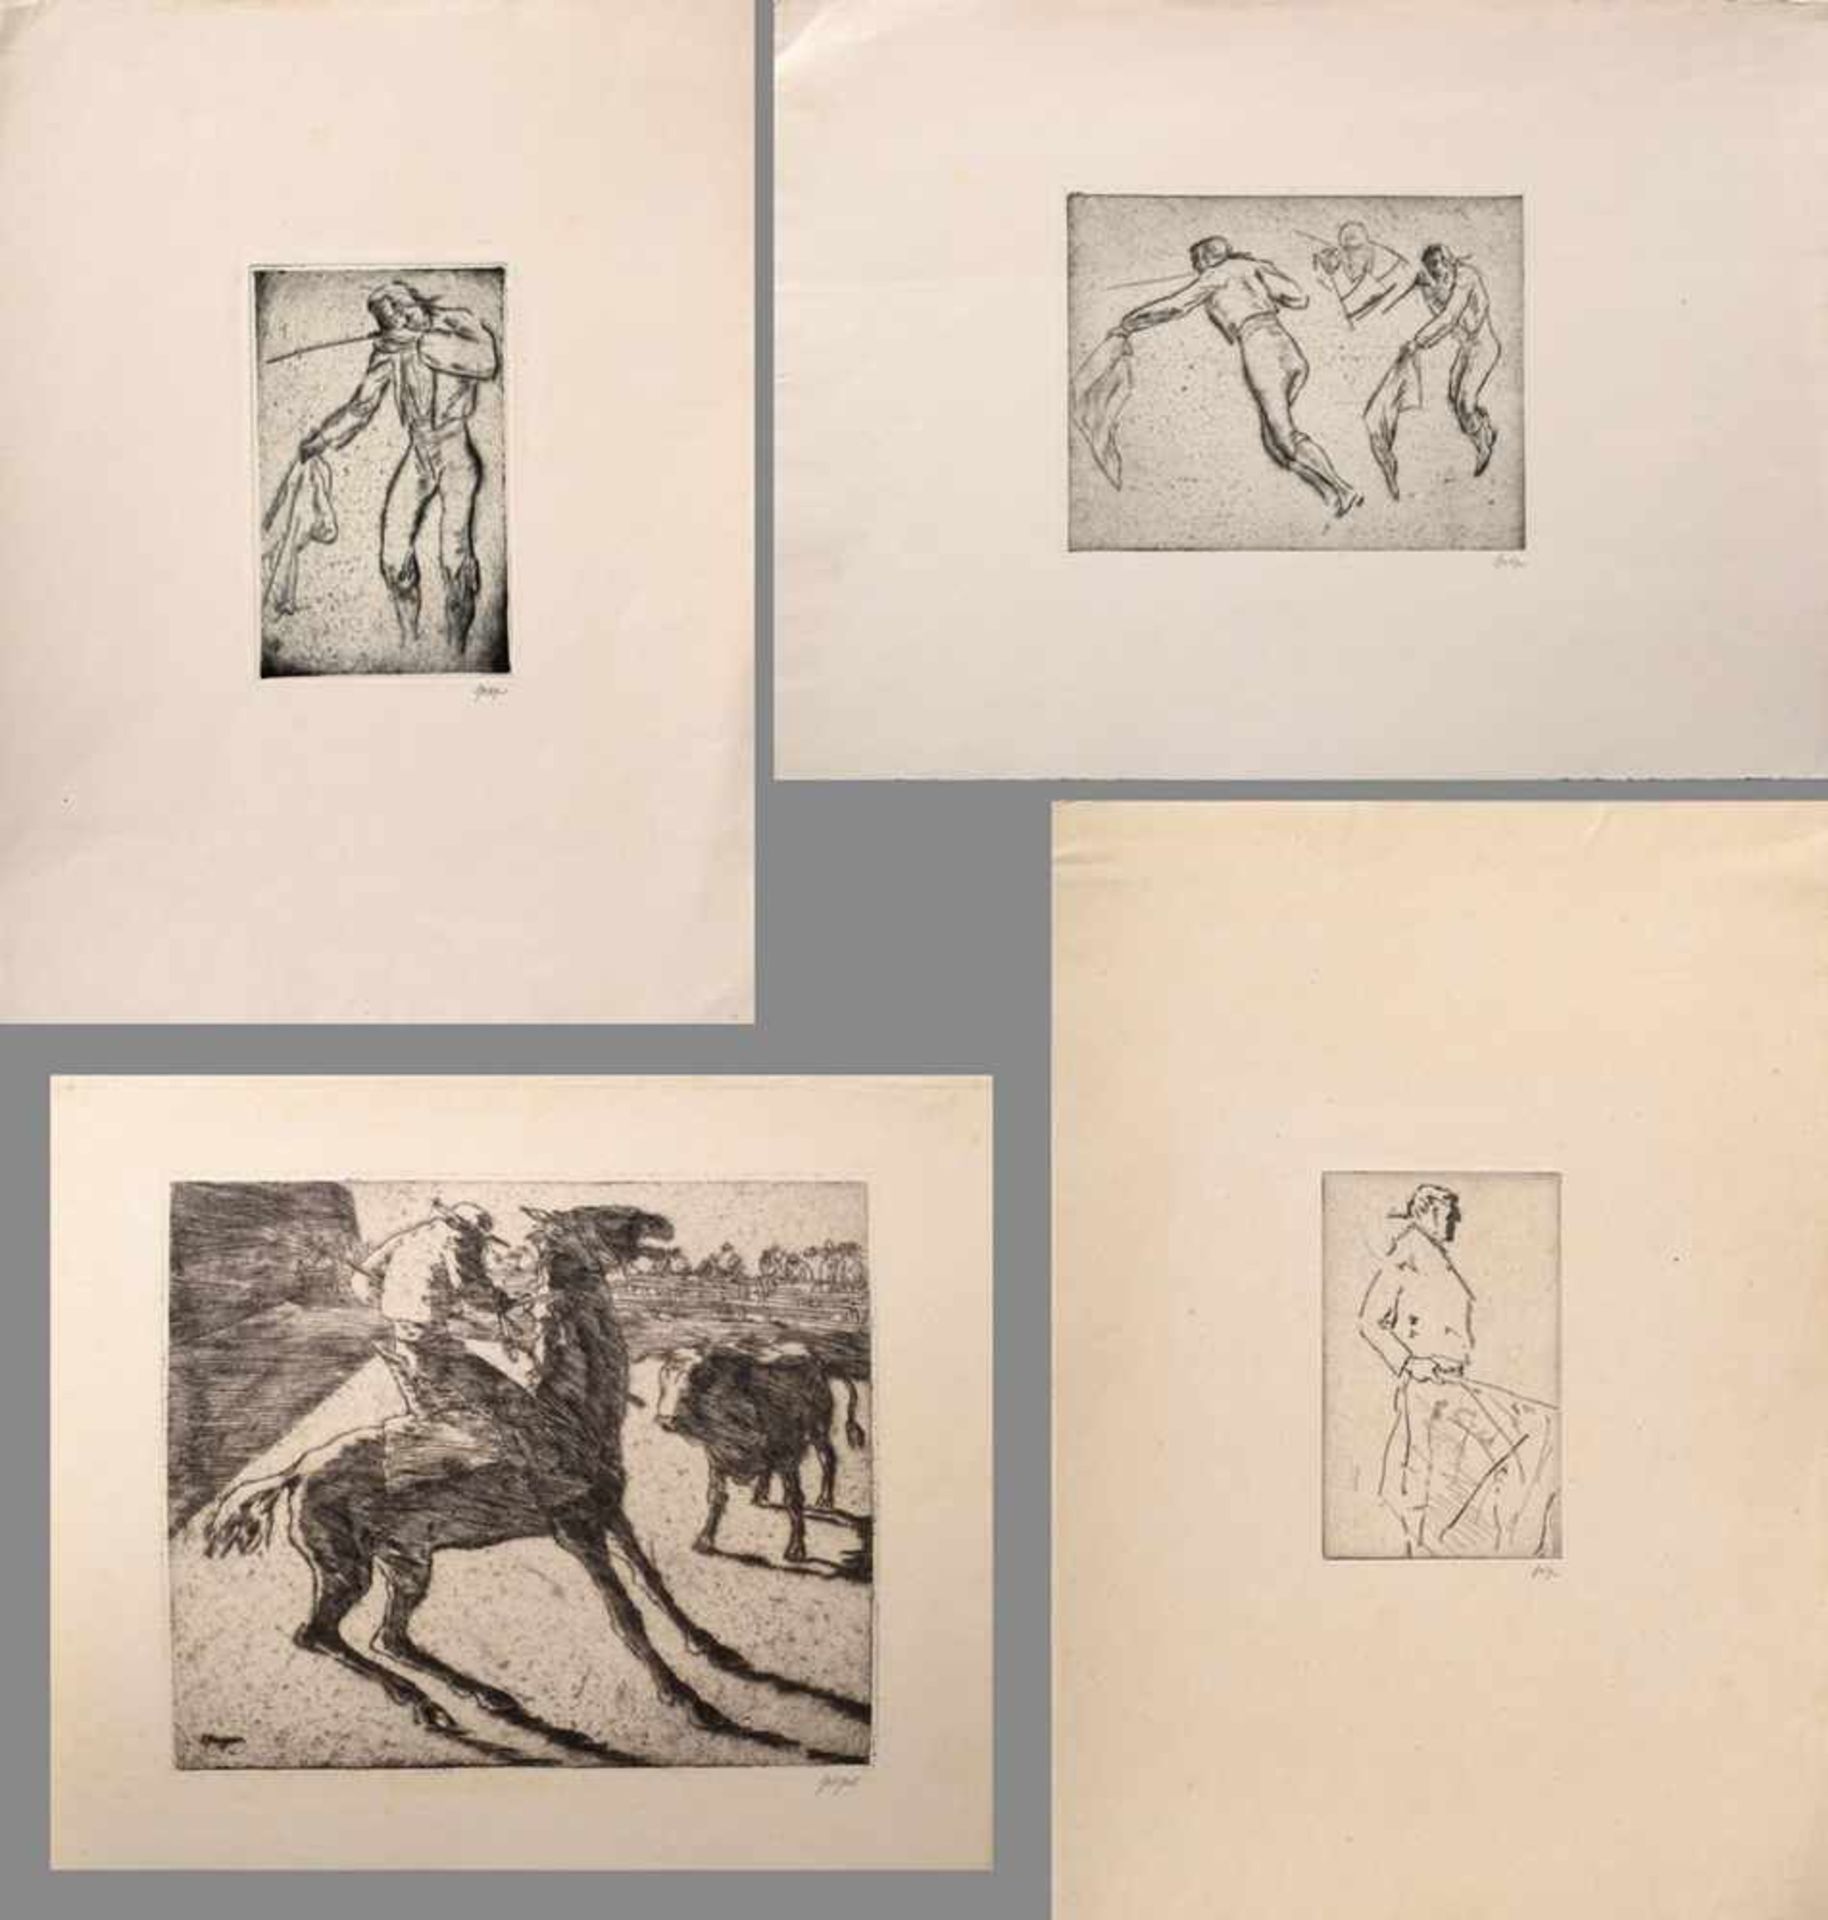 4 Various Geiger, Willi (1878-1971) "Bullfighting scenes", etchings, signed lower right, PD 15,